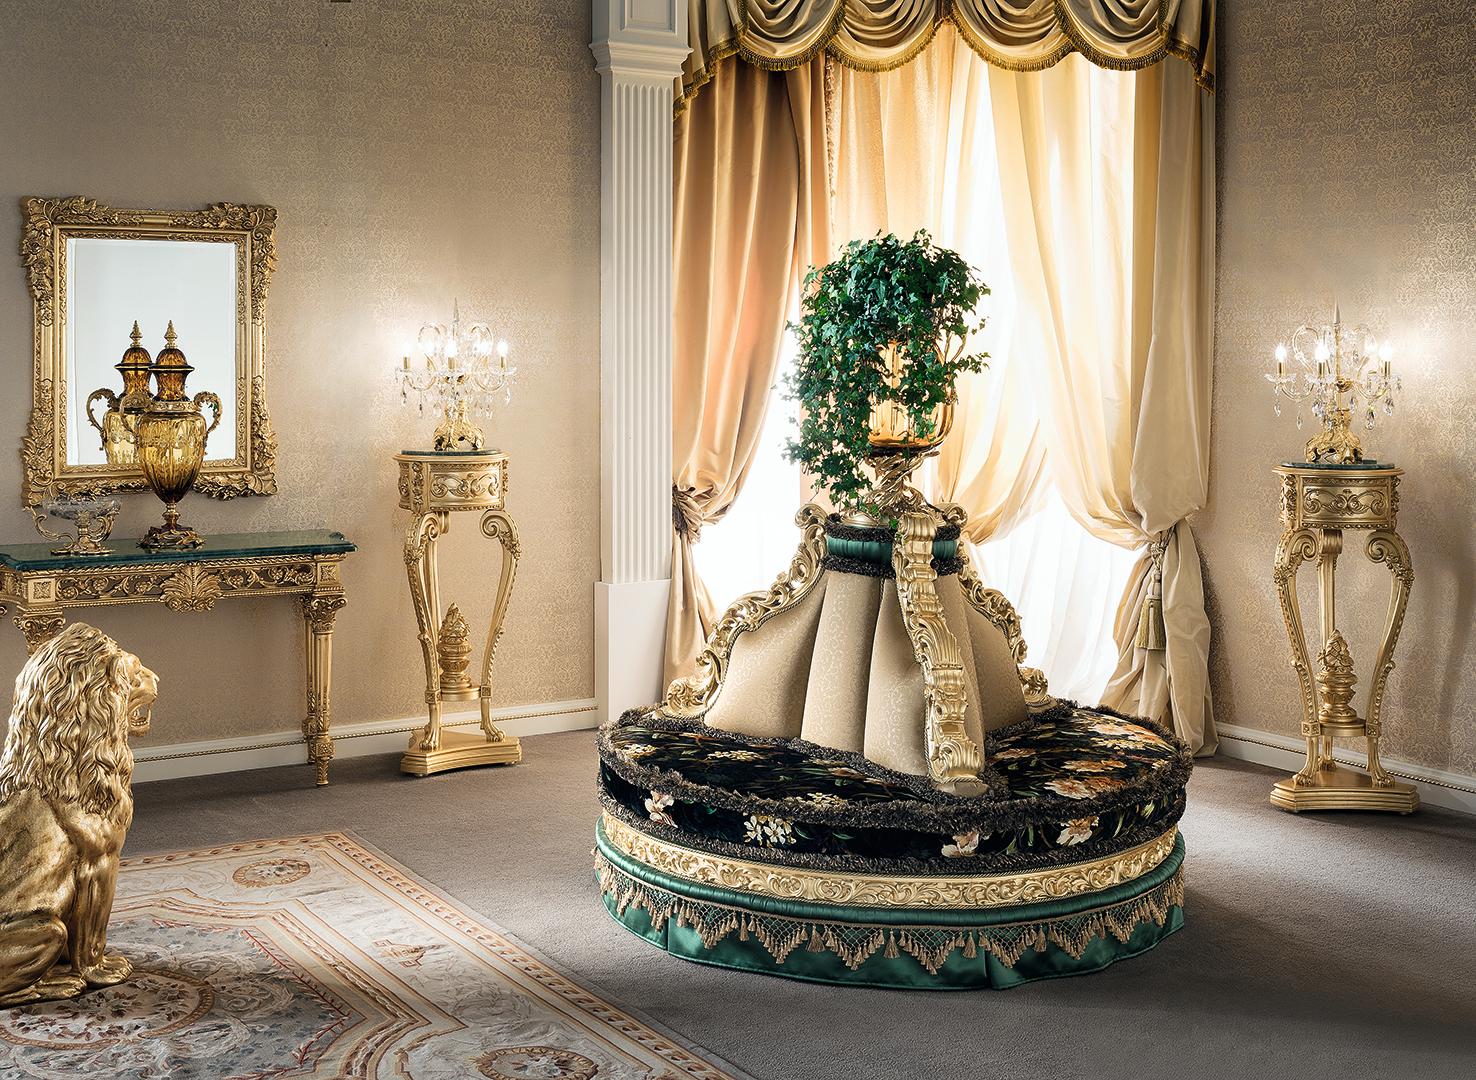 Astonishing Made in Italy console fully decorated with gold leaf finish and a Green Guatemala marble top. The precious hand-made carvings, which Modenese artisans developed through centuries, make this item eligible for royal palaces and elegant